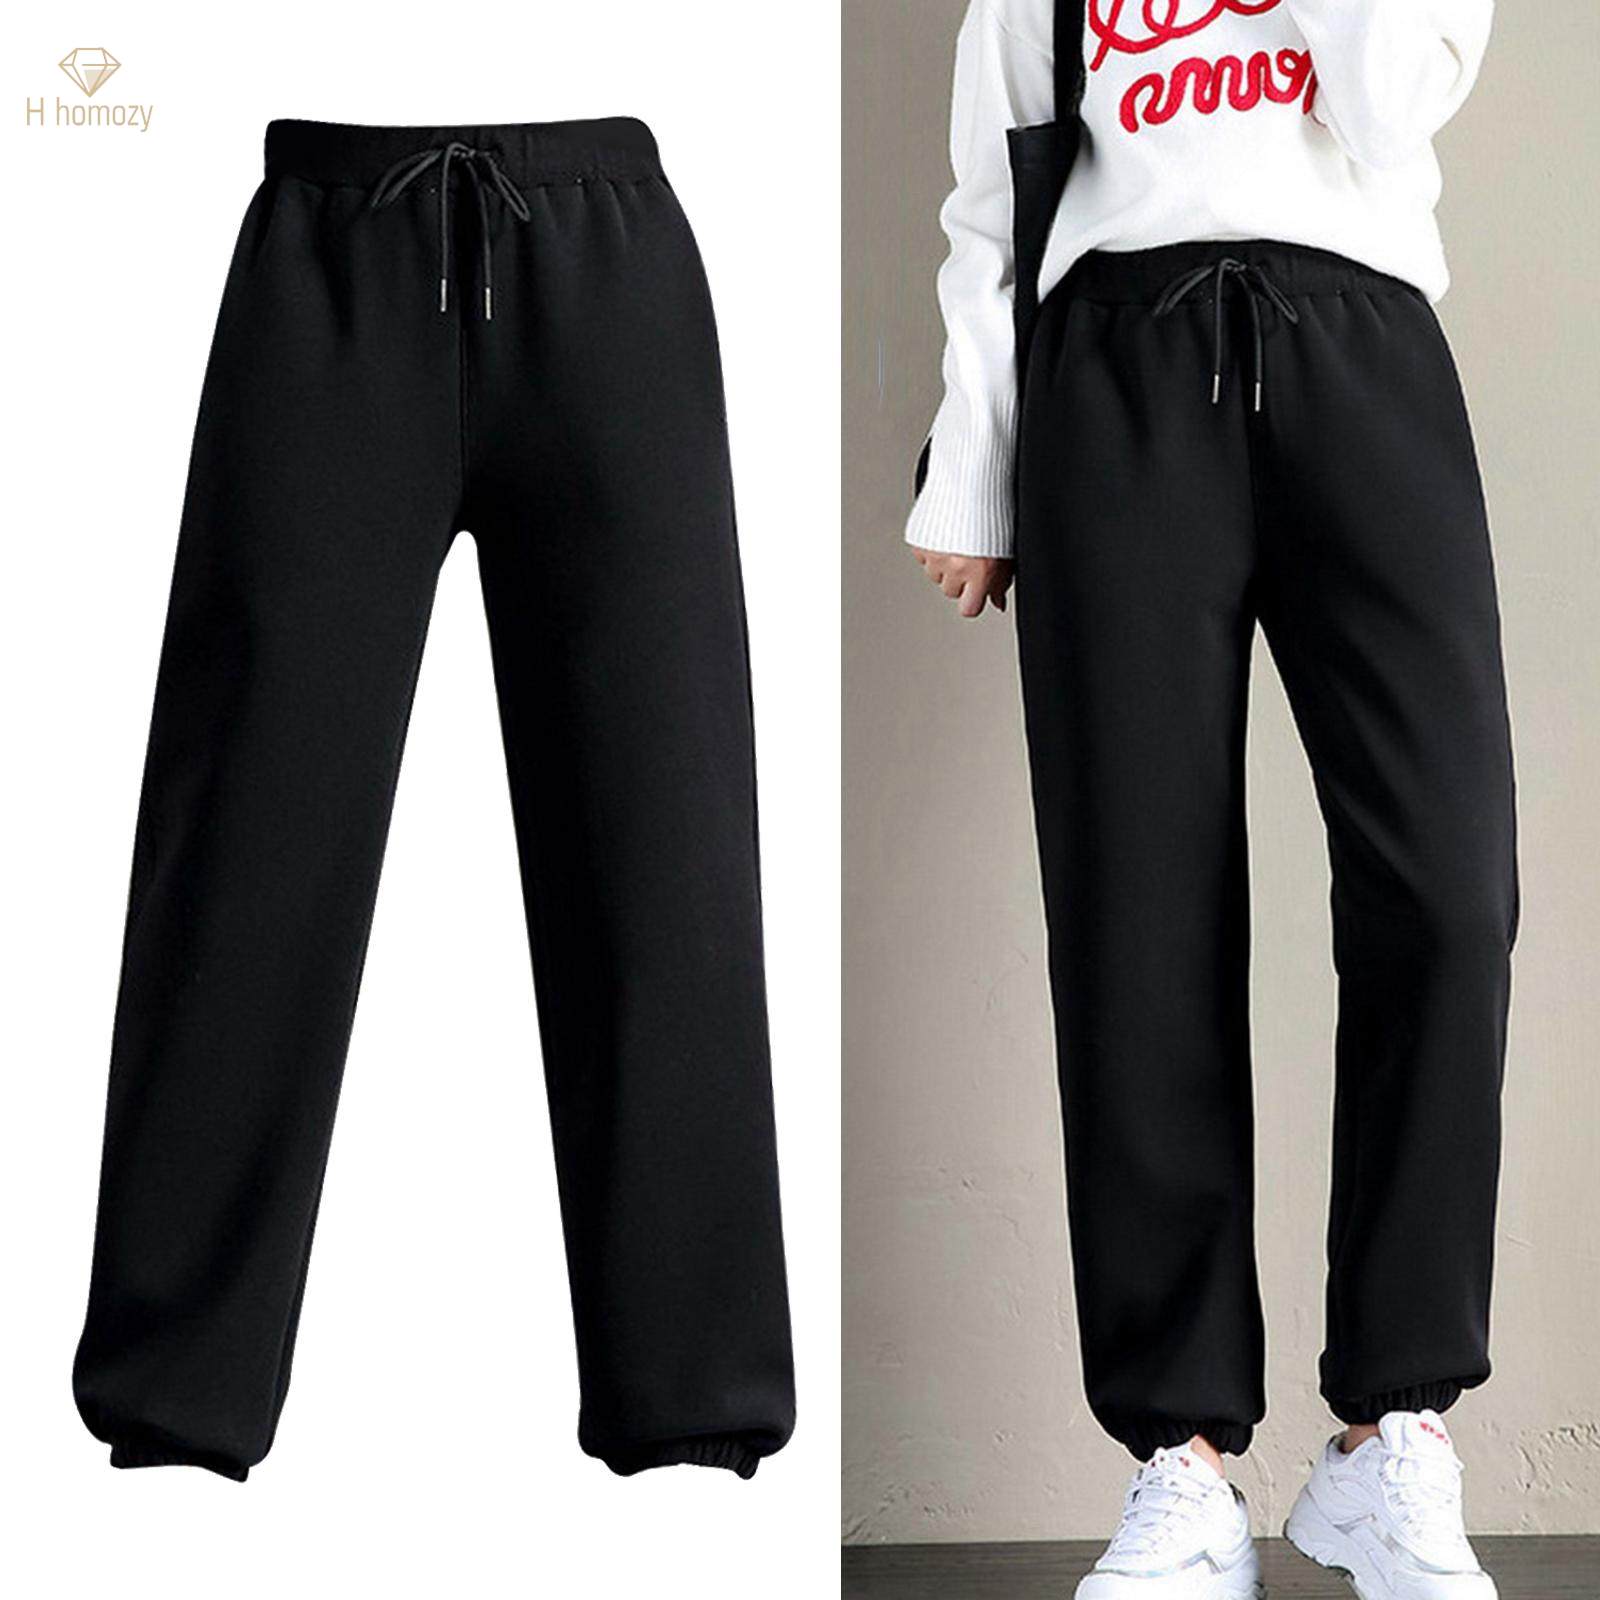 Women Warm Casual Trousers, Girls Winter Fleece Lined Jogger Pant,Ladies  Thickened Thermal Sweatpants Sports Trousers with Drawstring Closure -  Black XL